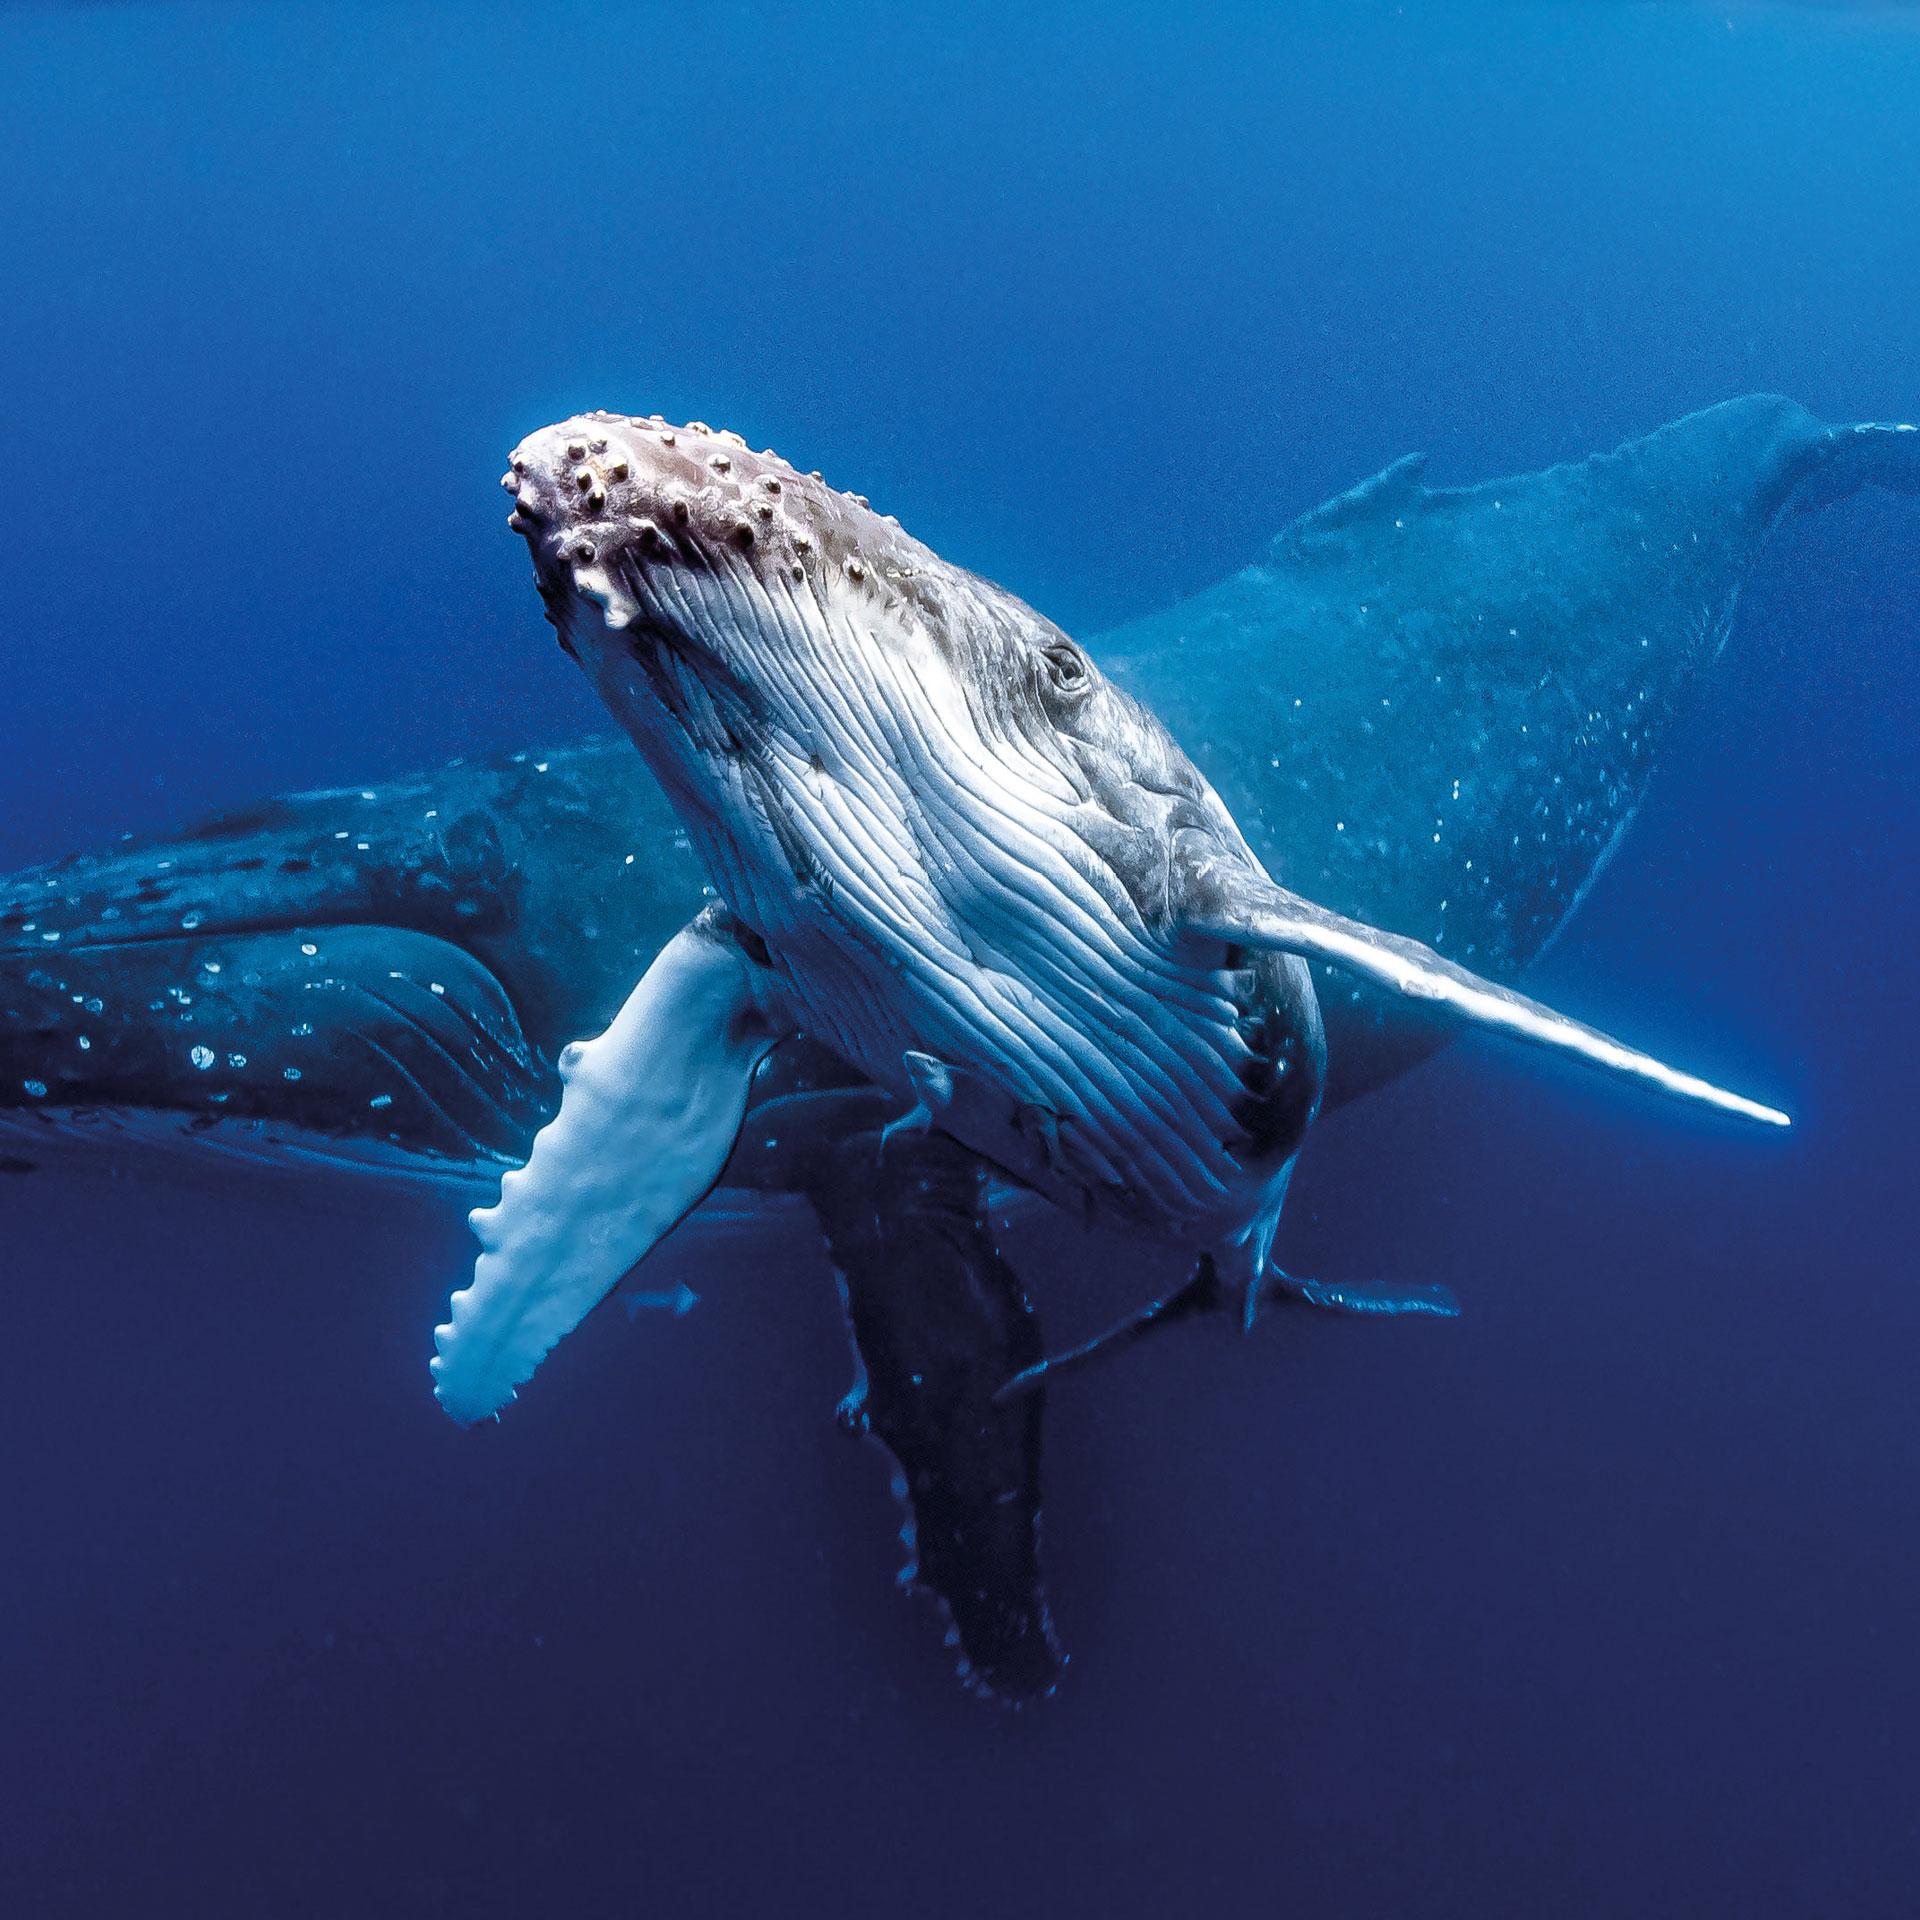 A humpback whale swimming underwater in the ocean. 